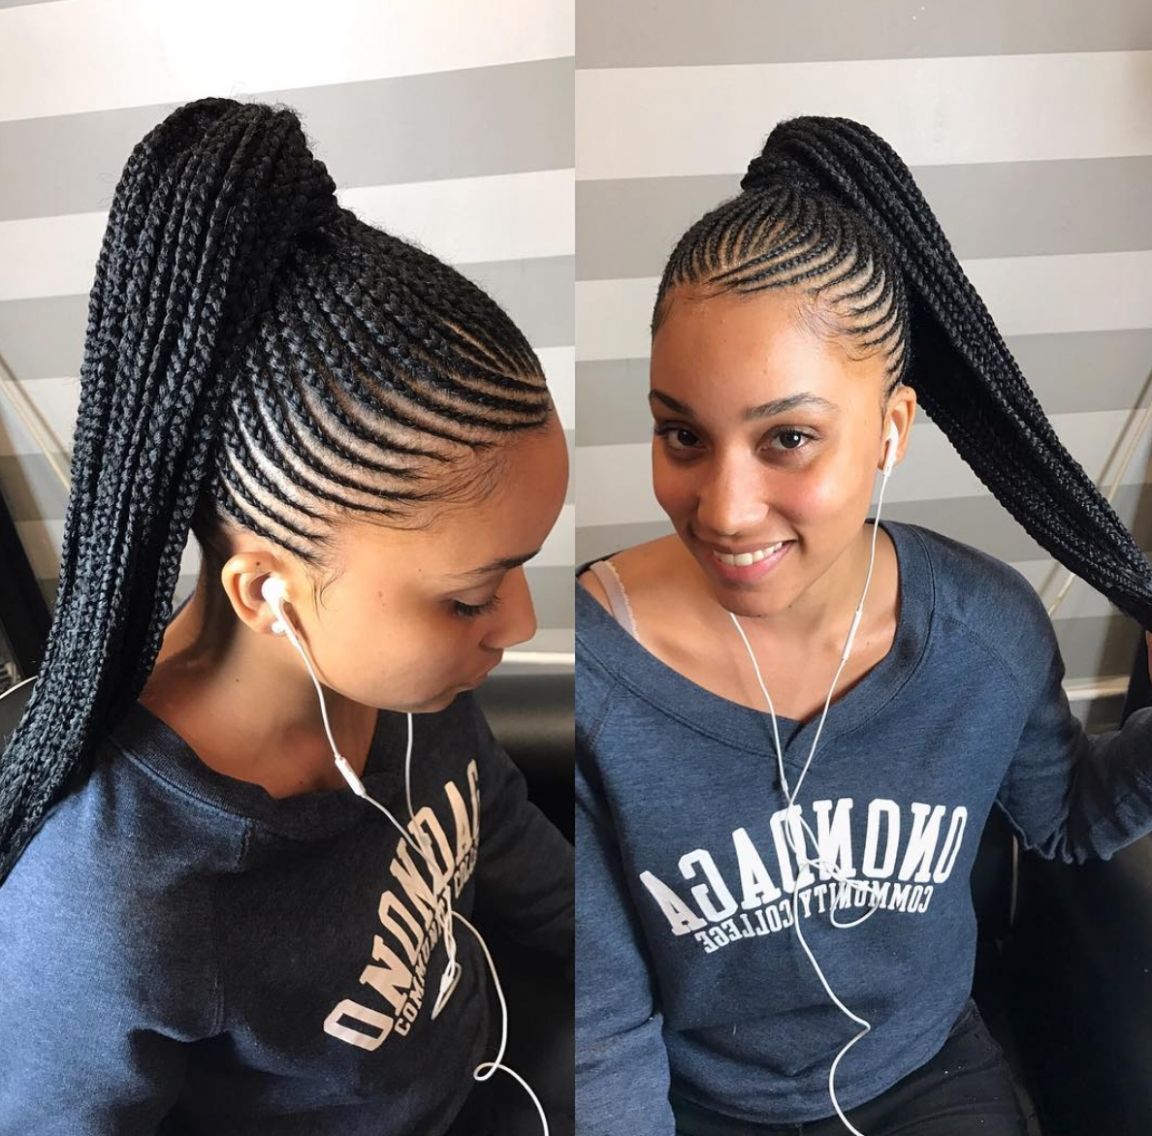 Fashionable Braided Hairstyles For Black Women Regarding Braided Hairstyles For Black Hair – Hairstyles Parlor (View 8 of 15)